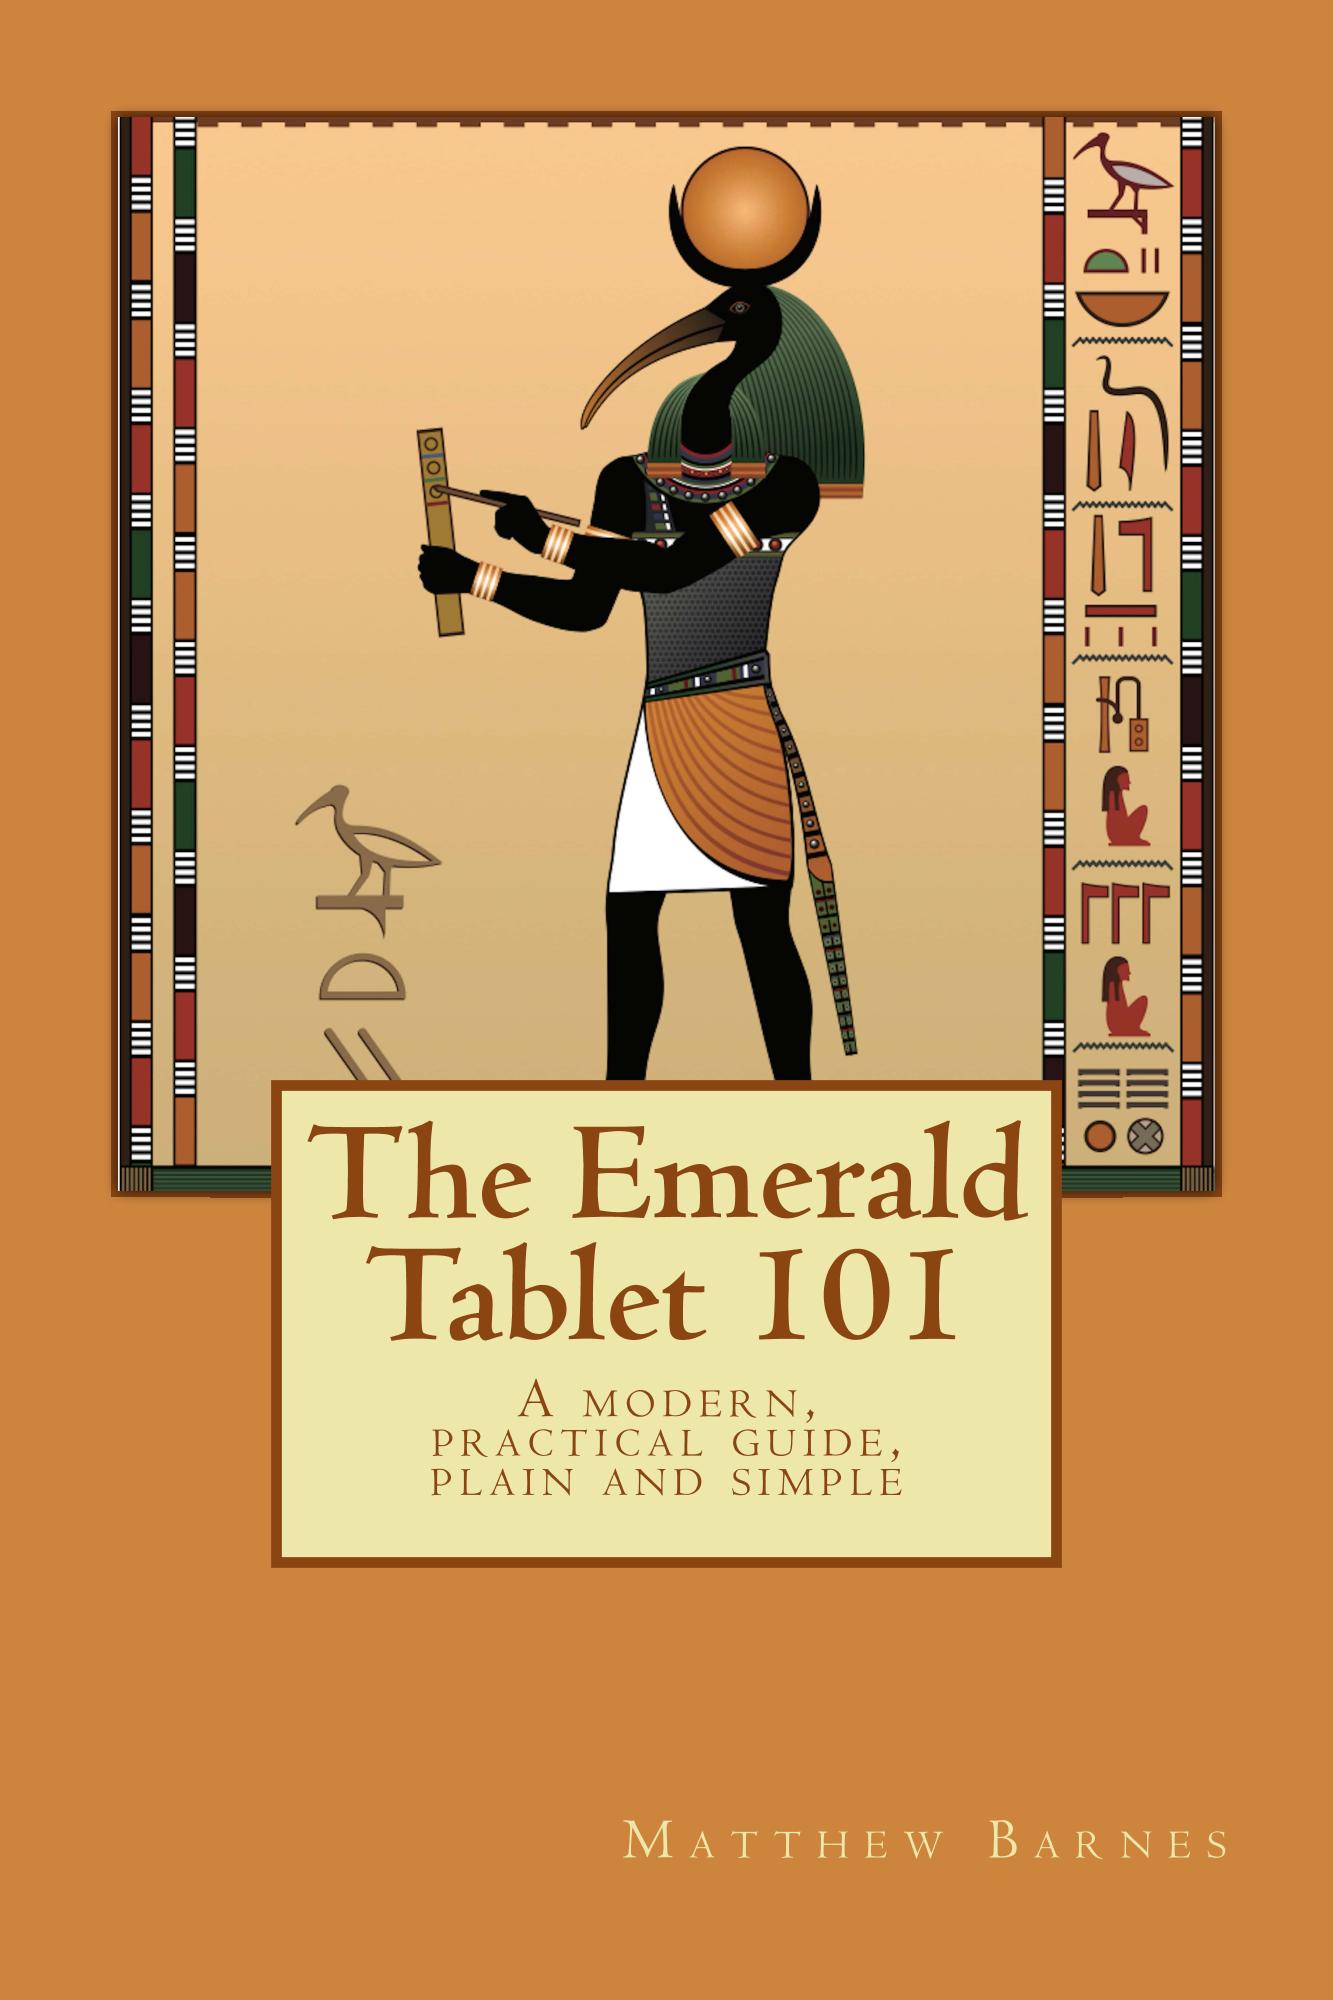 FREE: The Emerald Tablet 101: a modern, practical guide, plain and simple (The Ancient Egyptian Enlightenment Series) by Matthew Barnes